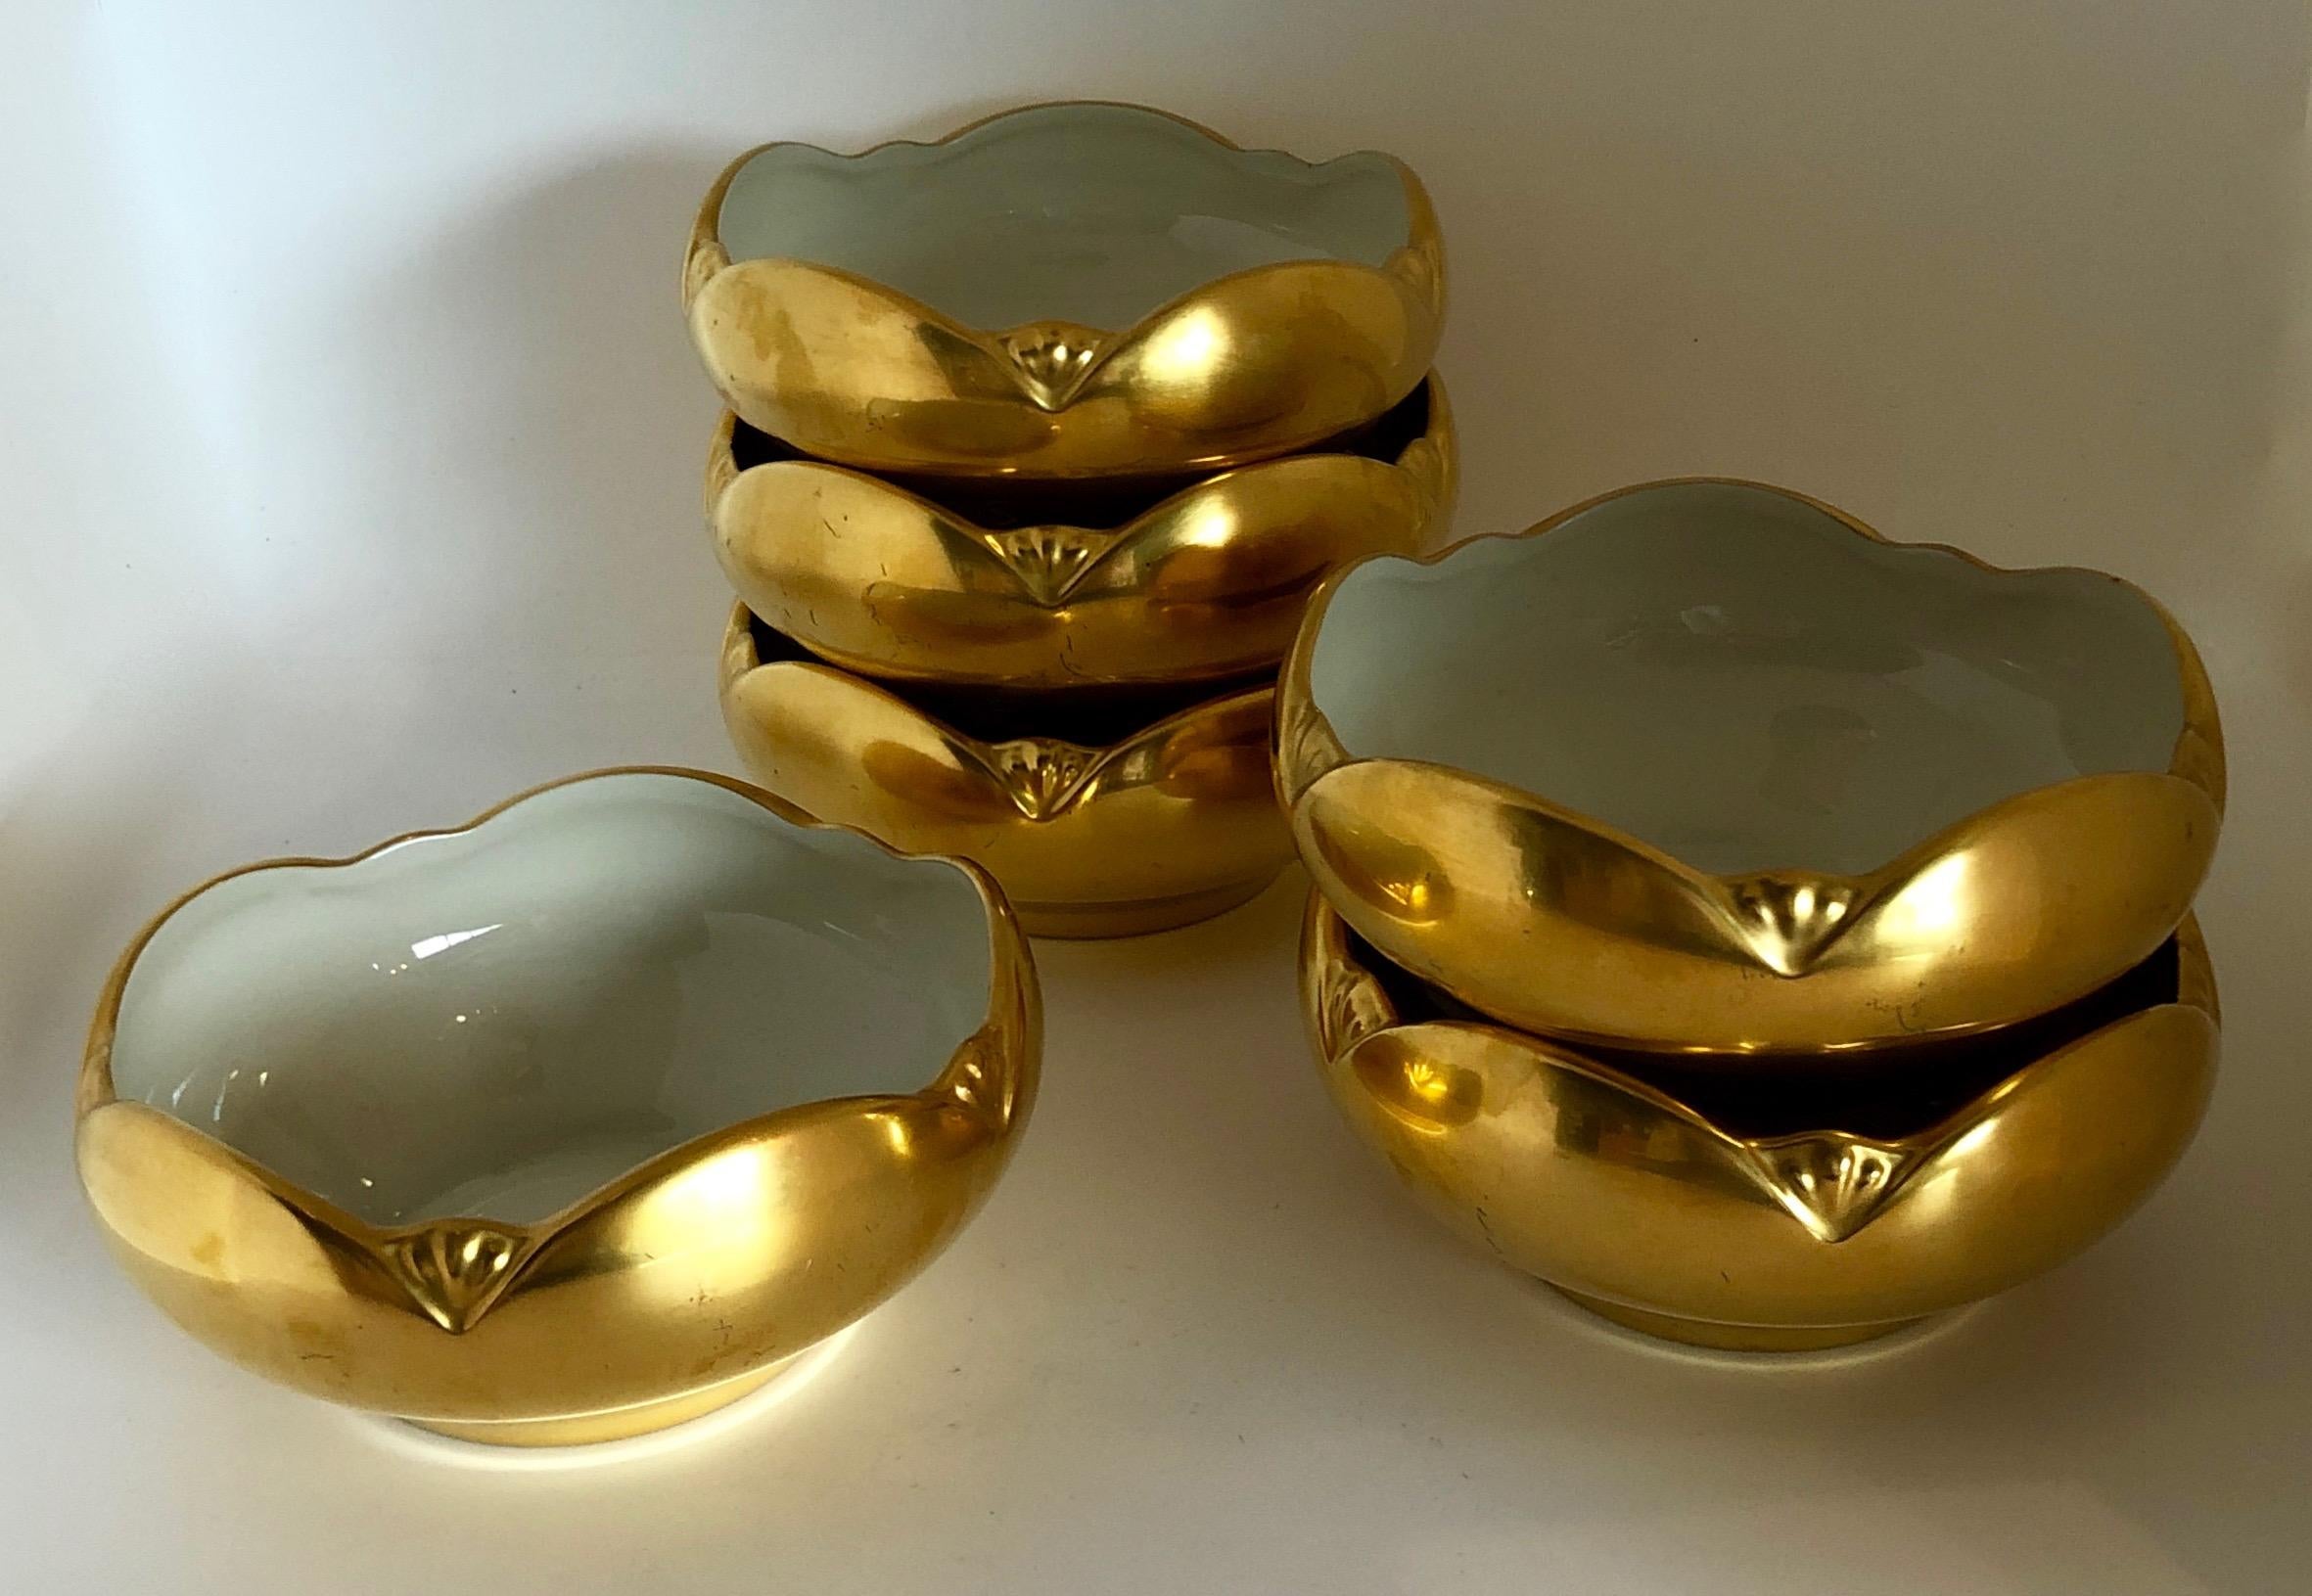 Set of 6 Picard Hand Decorated Ensemble Gold and White Interior Porcelain Bowls In Good Condition For Sale In Houston, TX